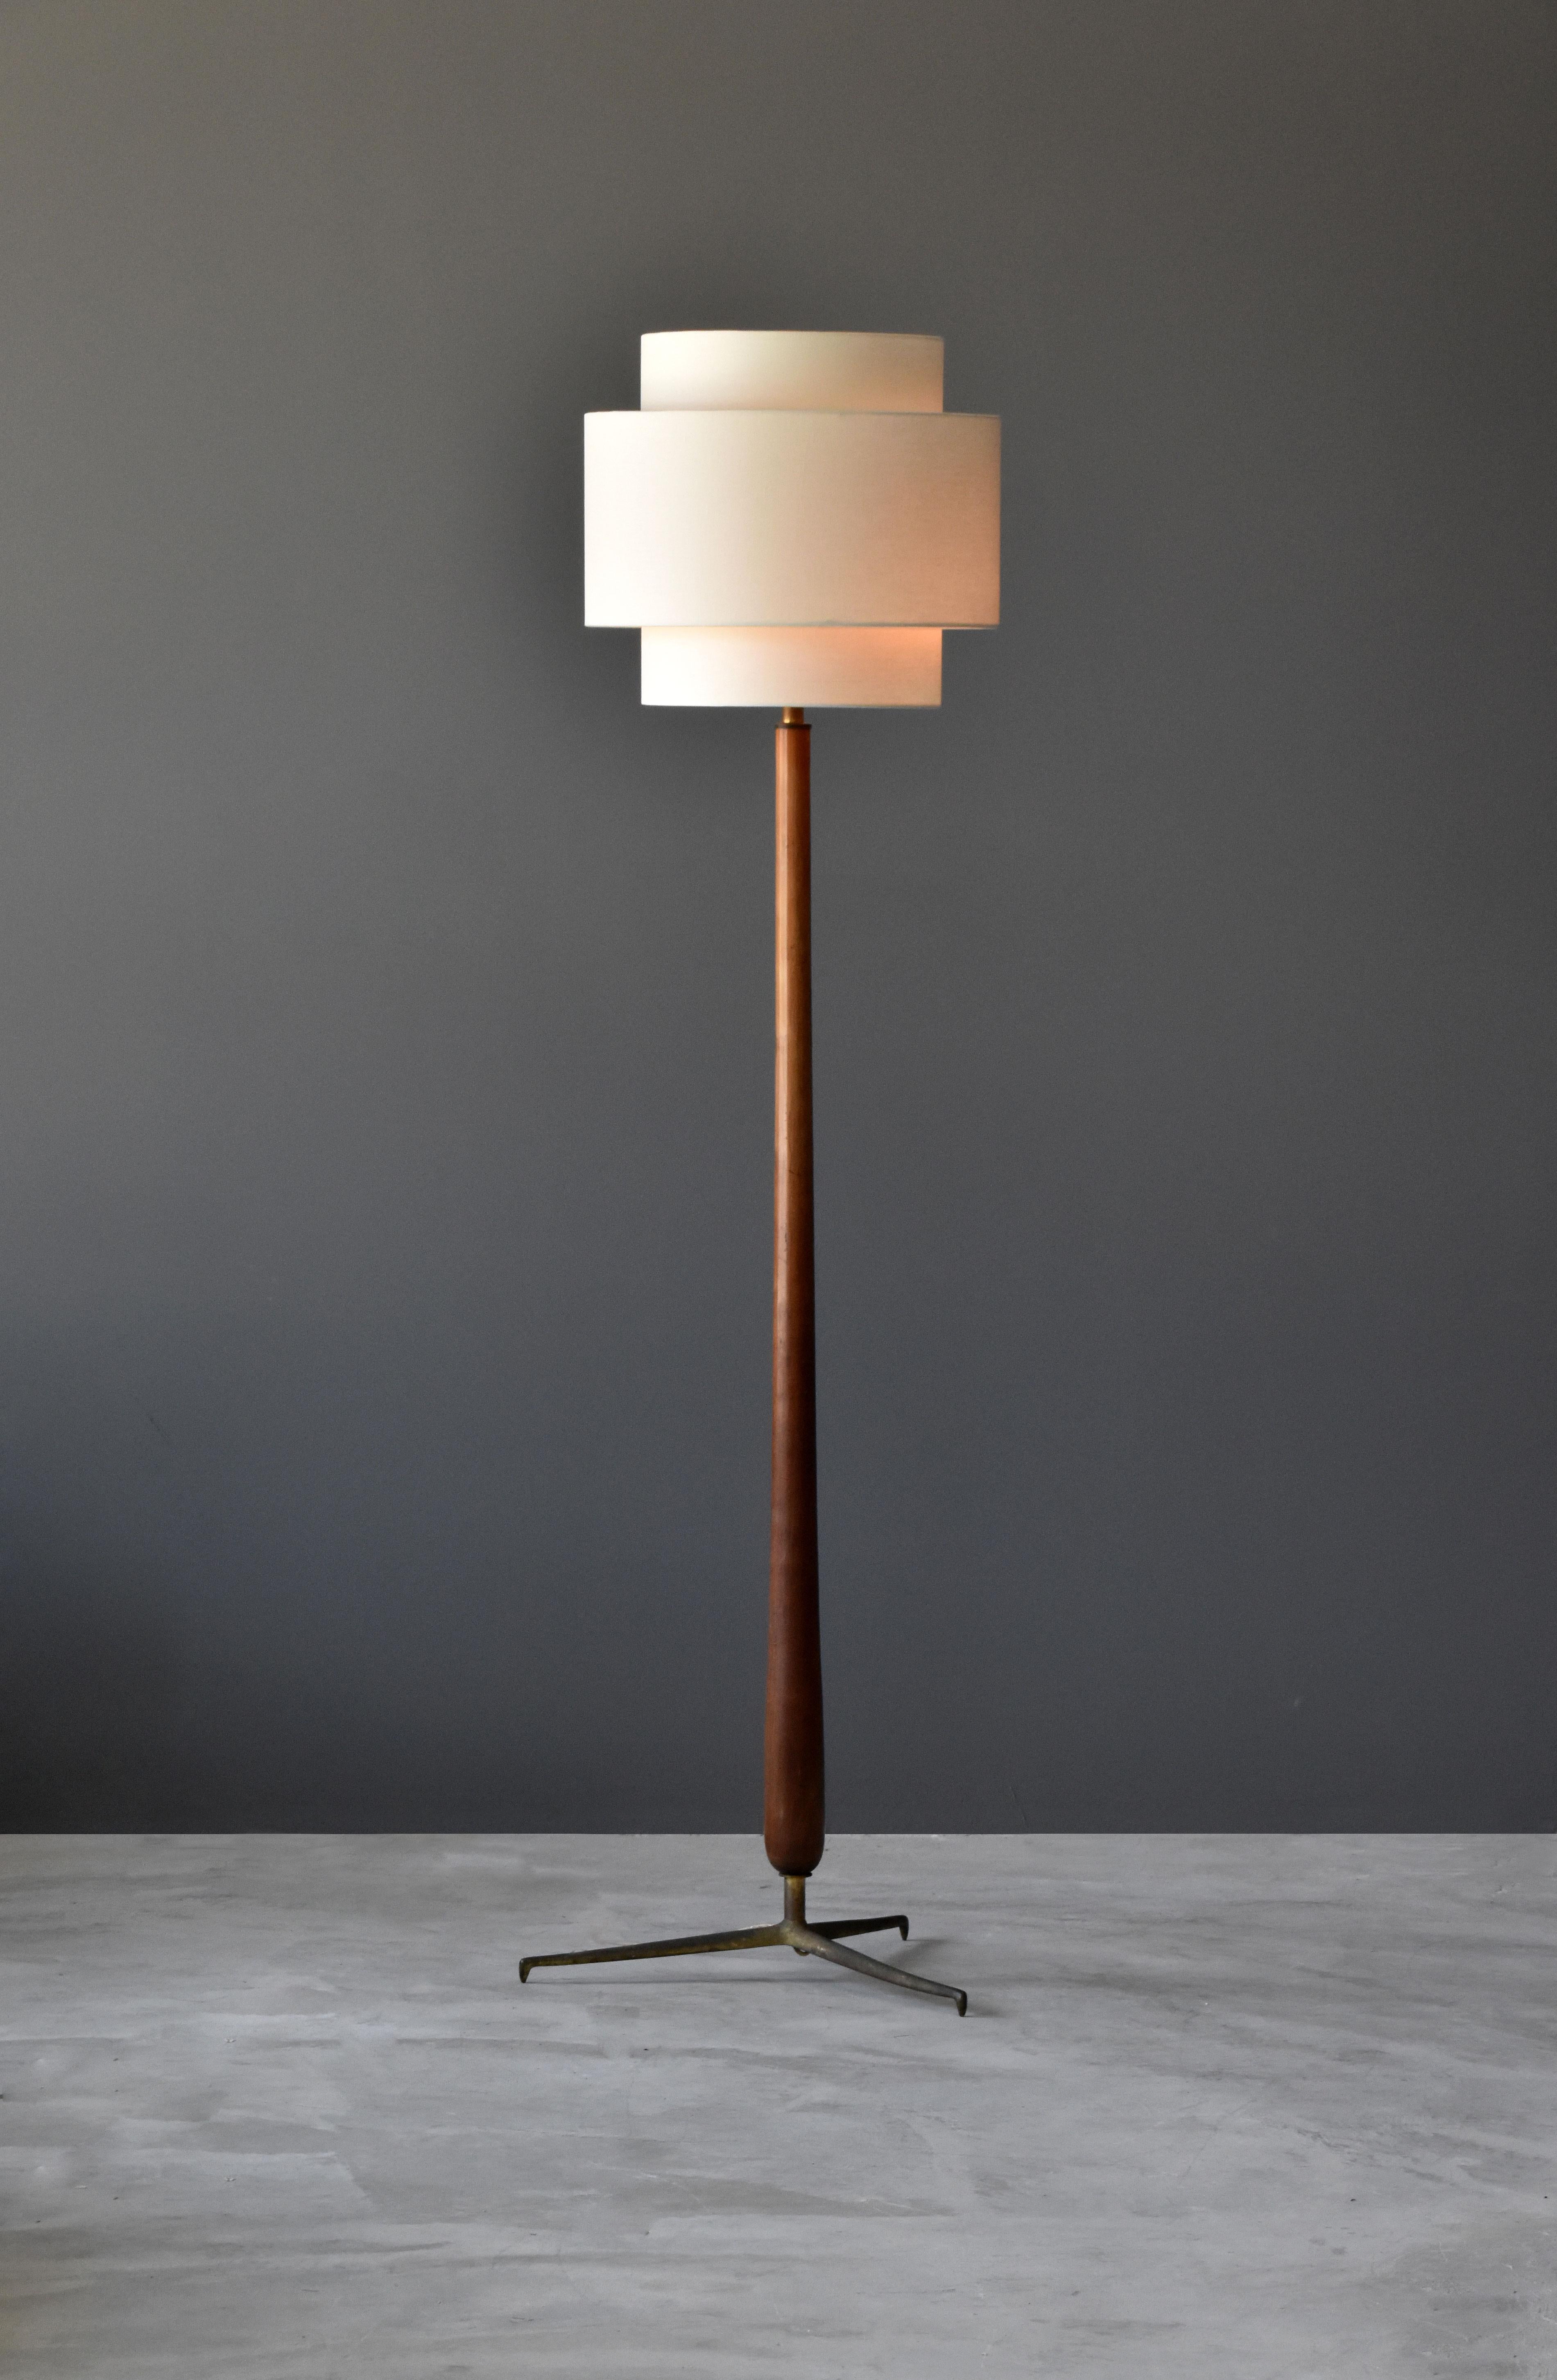 A highly modernist floor lamp, design attributed to Giuseppe Ostuni, presumably manufactured by O-Luce, Italia.

The organic oak rod rests on a brass tripod base. Features an uplight in addition to double side sockets.

Other Italian lighting